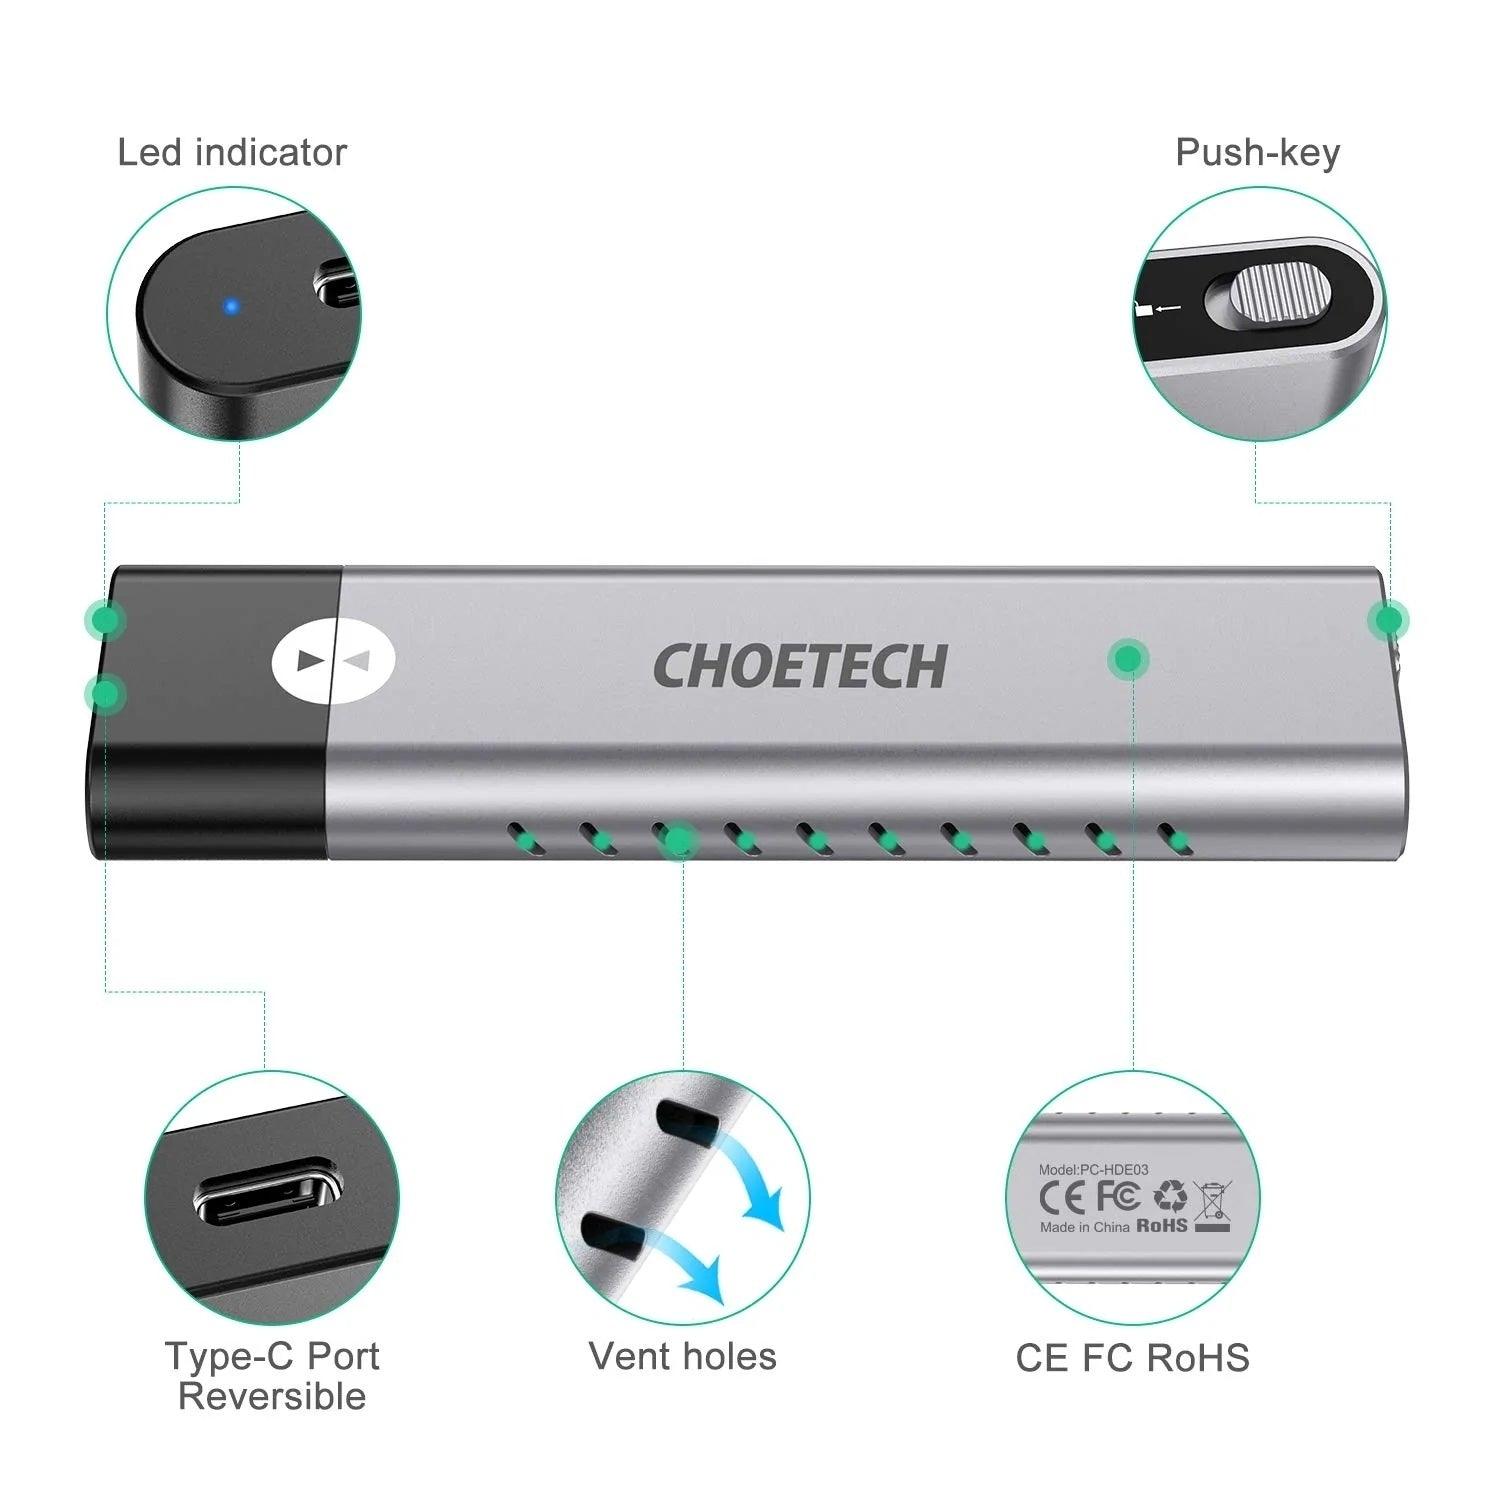 CHOETECH PC-HDE03 NVMe PCIe M.2 SSD To USB 3.1 Type C Gen 2 Adapter And Enclosure